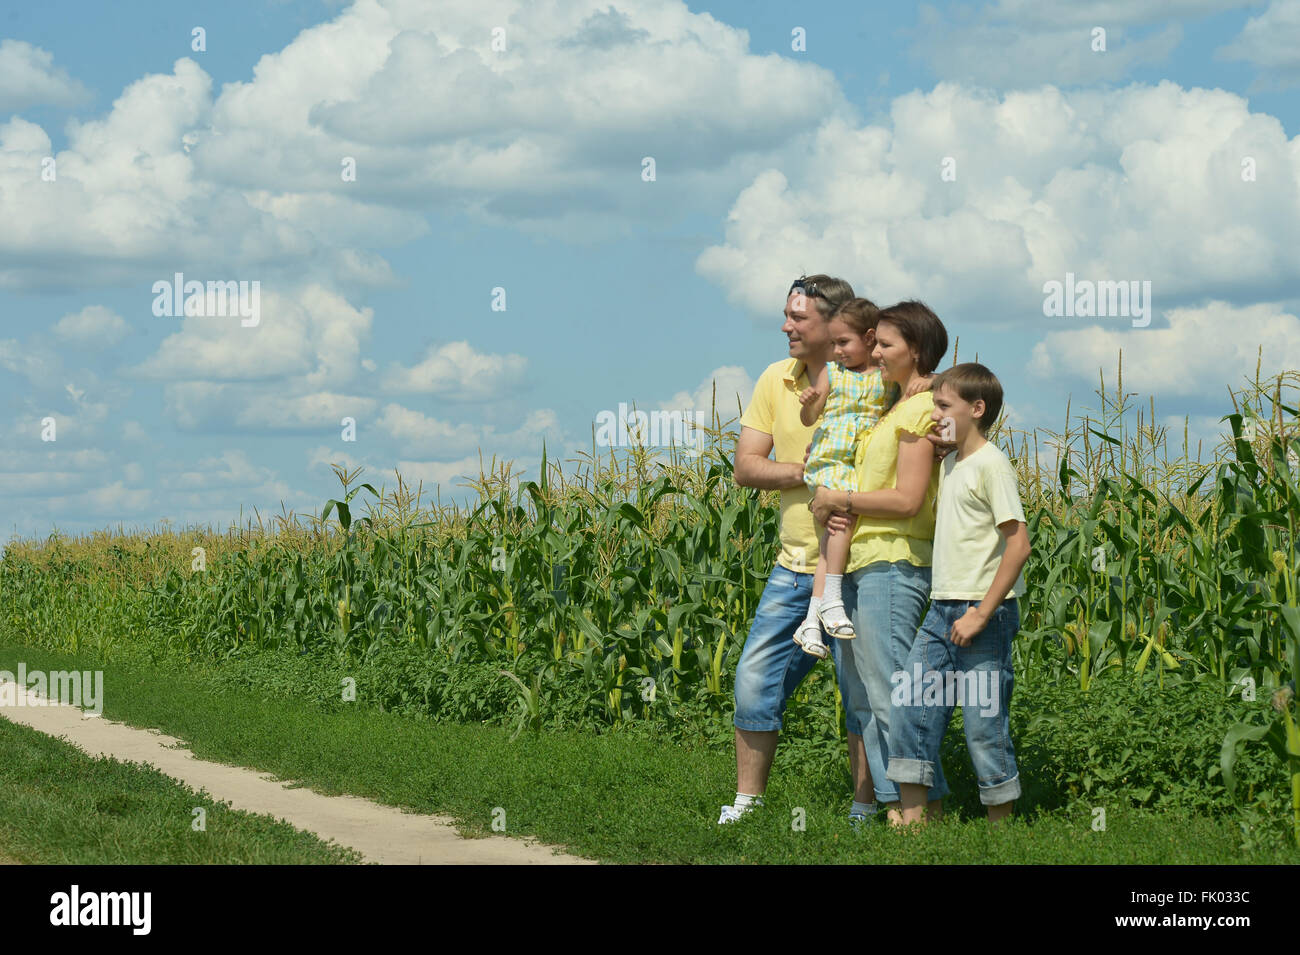 Family standing in field Stock Photo